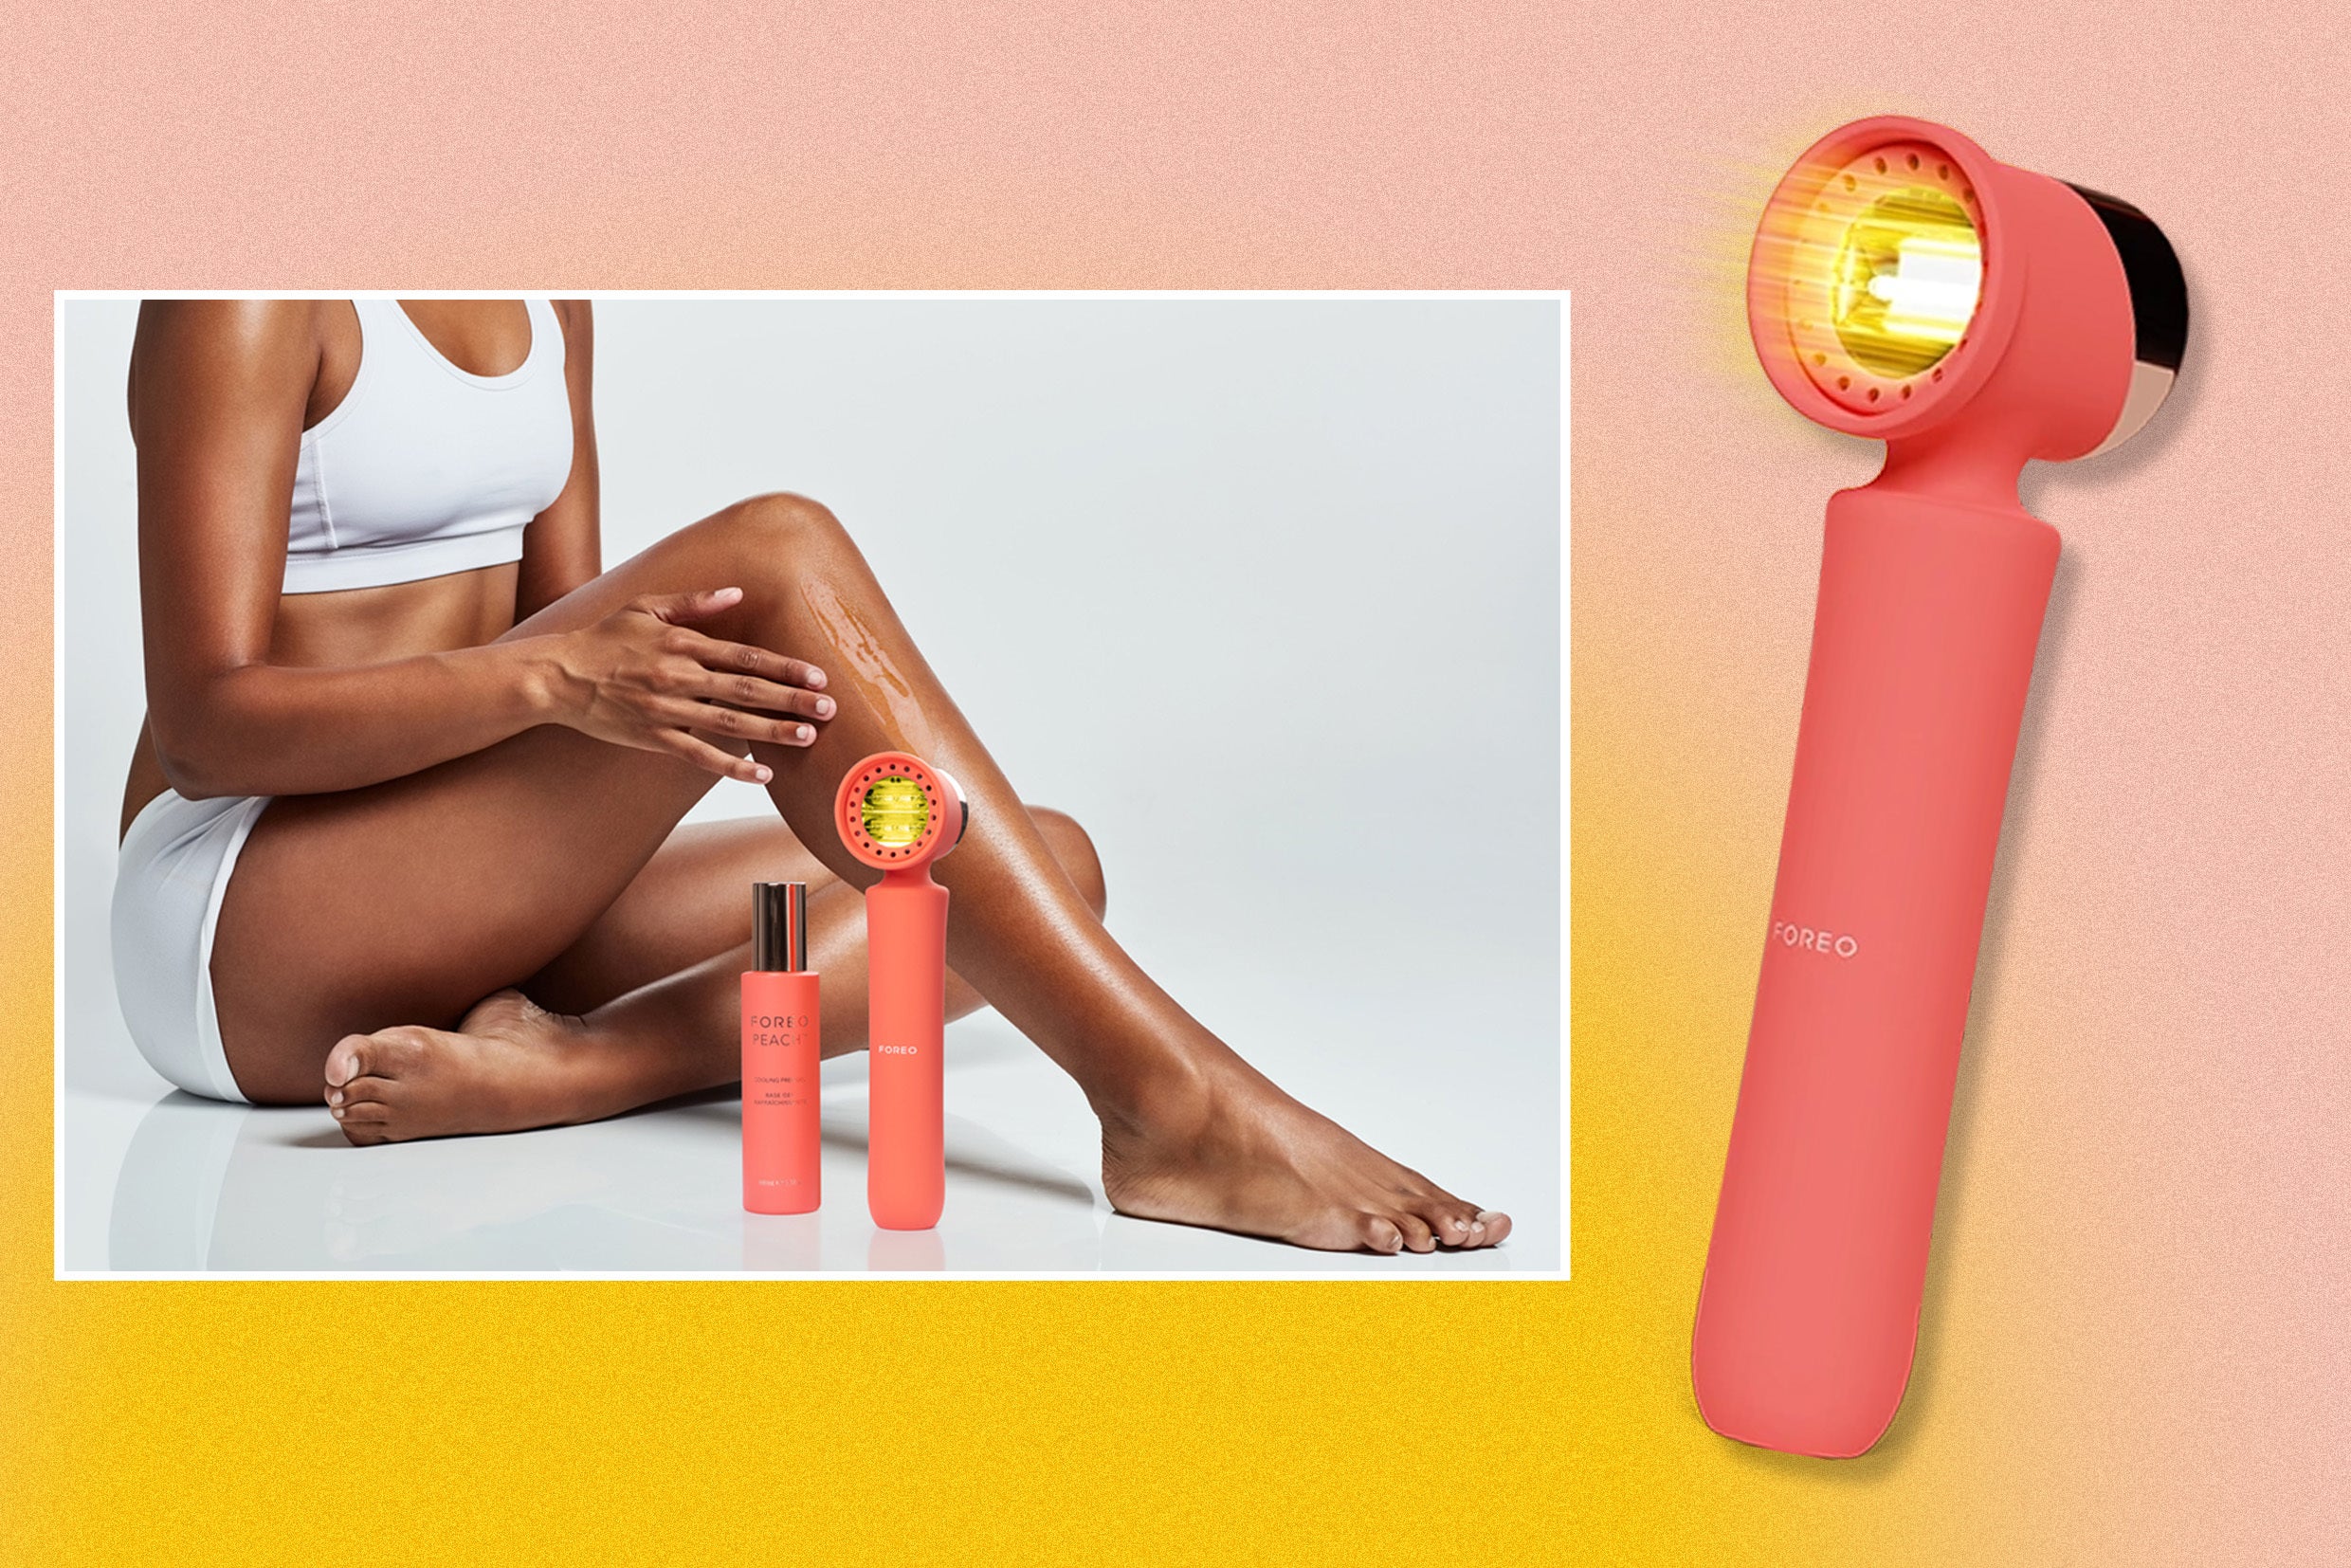 Foreo peach 2 IPL review | Independent The